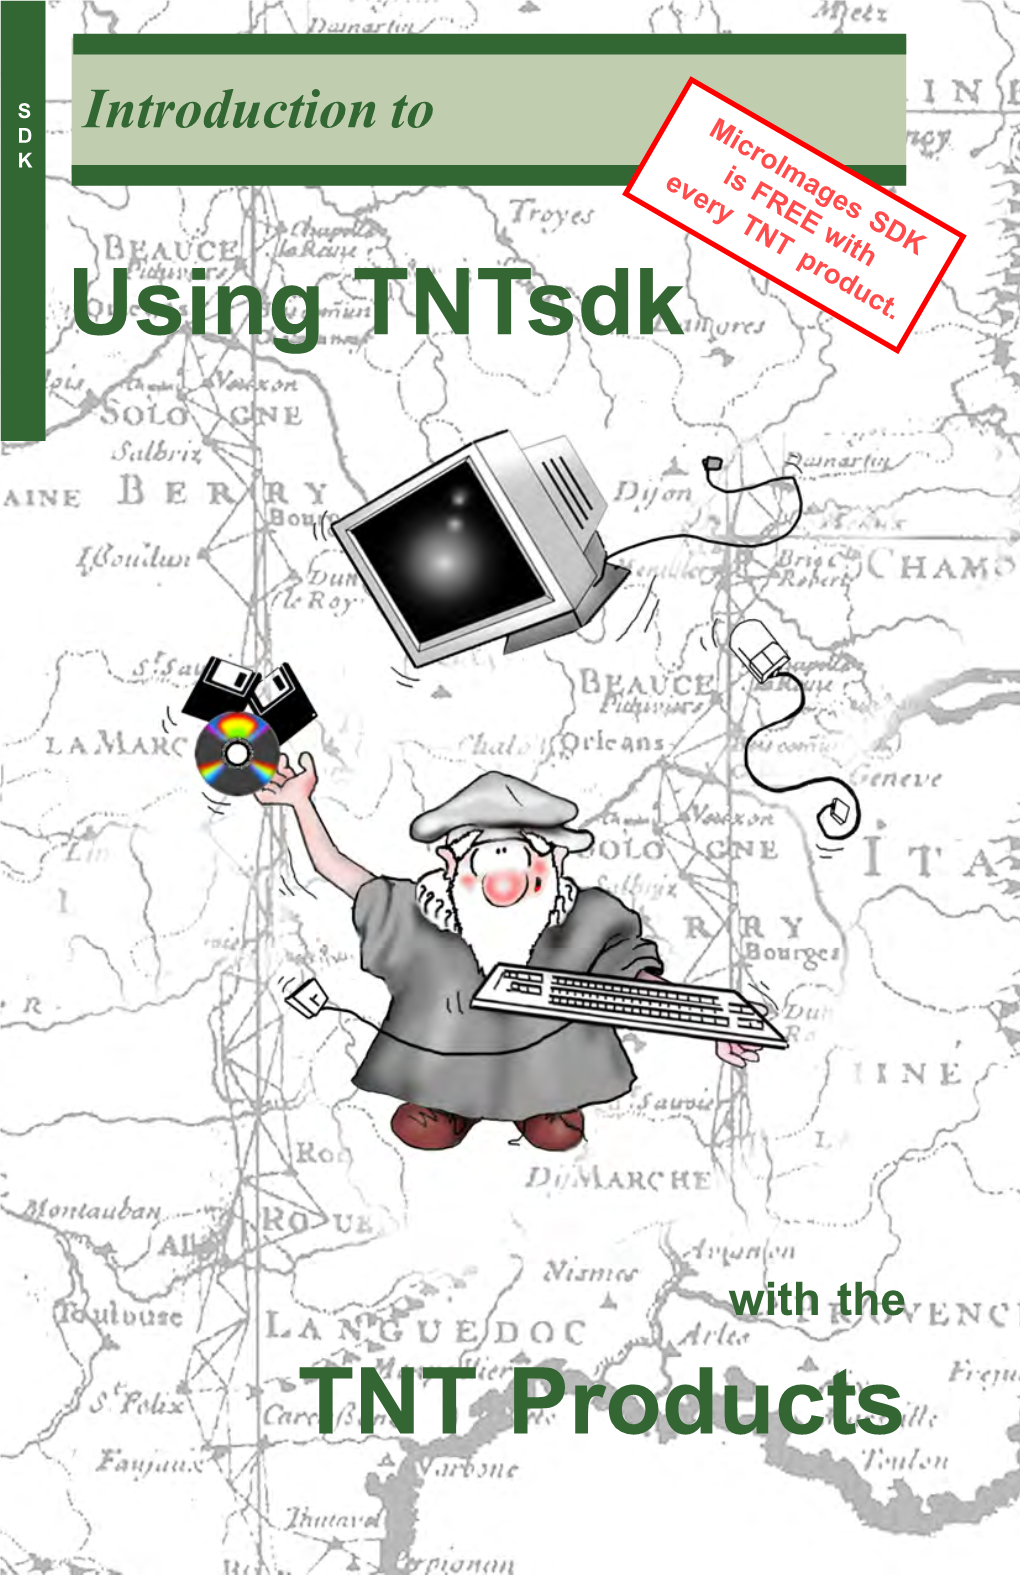 Tutorial D Introduction to Microimages SDK K Everyis TNT FREE Product